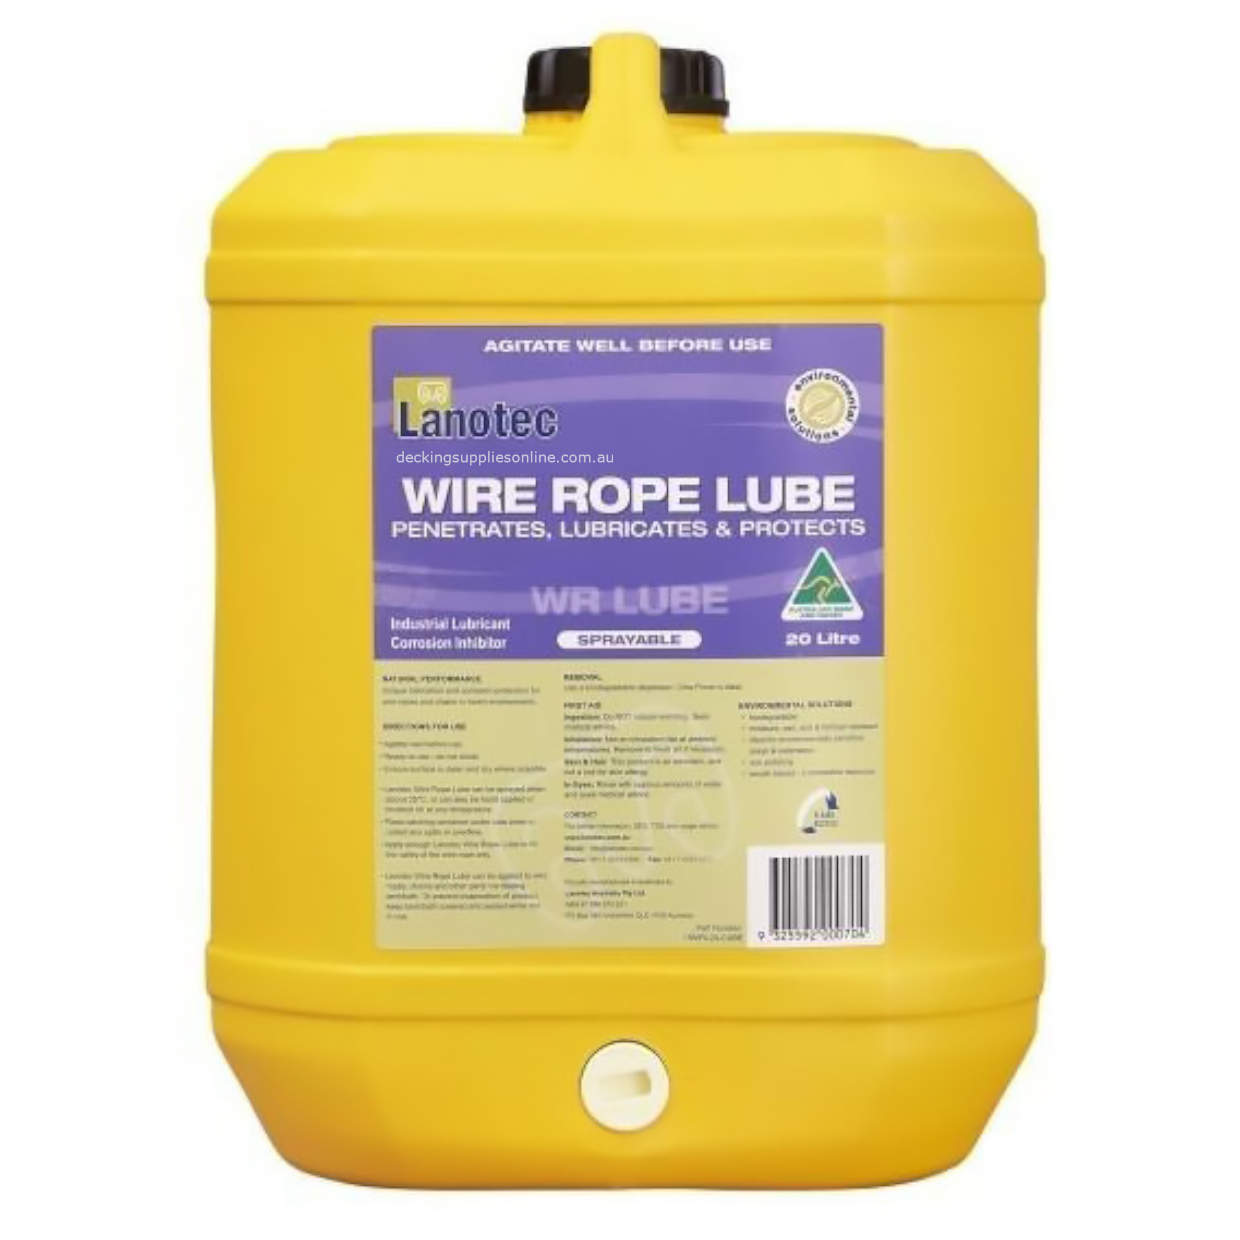 Lanotec_Wire_Rope_Lube_20L_Decking_Supplies_Online